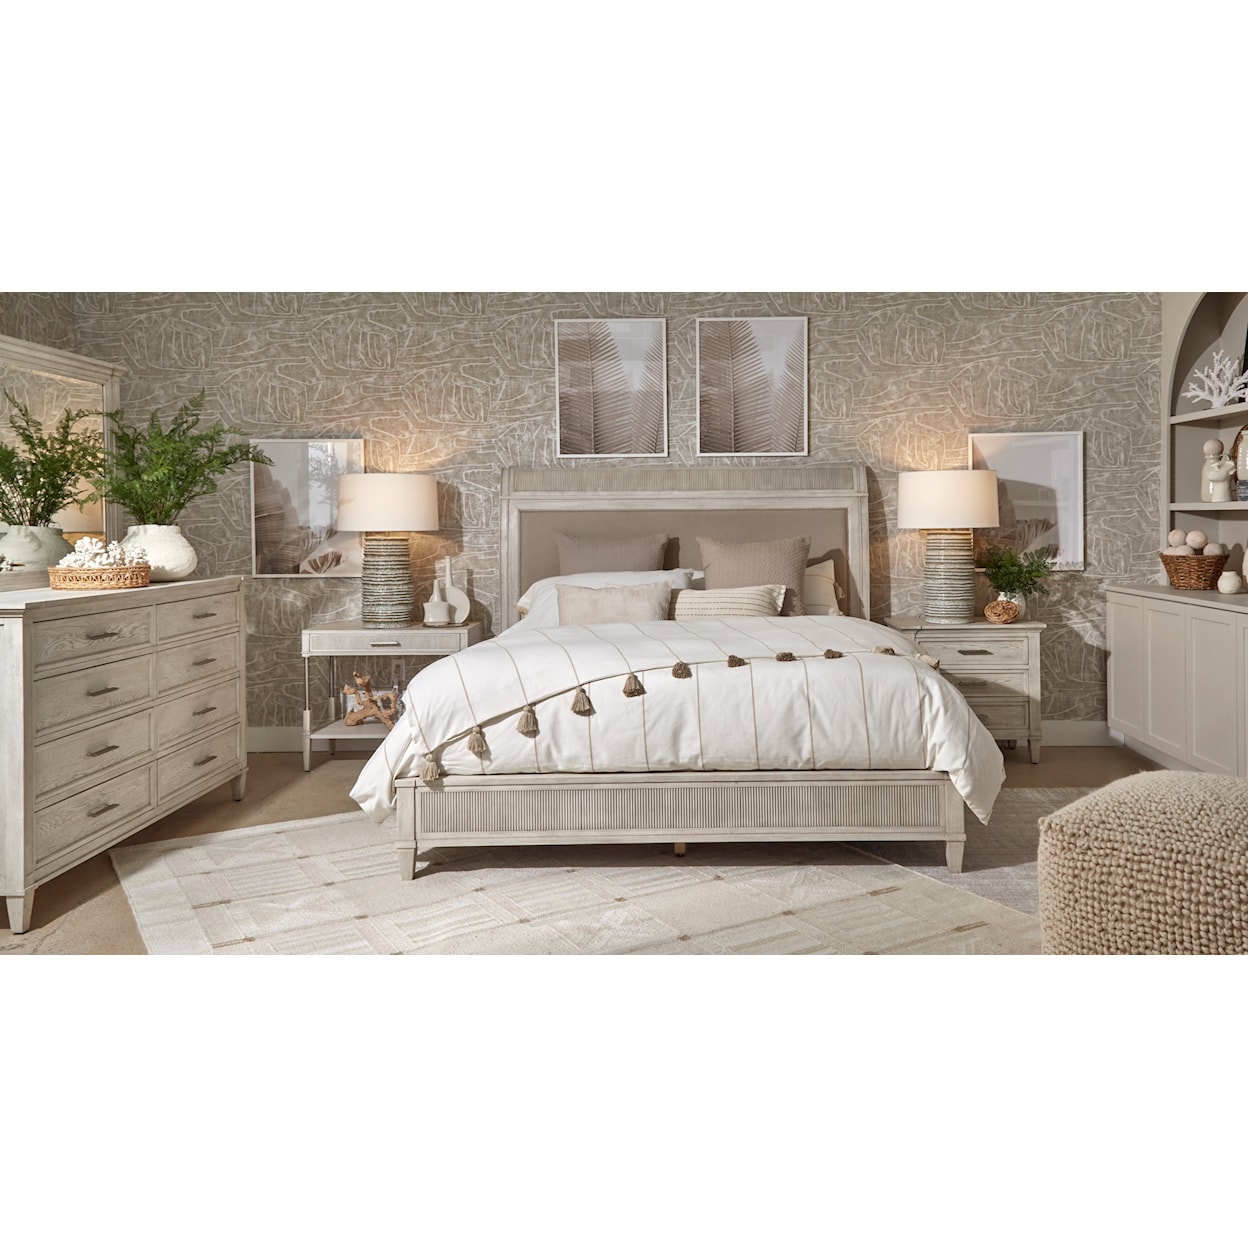 The Preserve Wyngate California King Bedroom Group